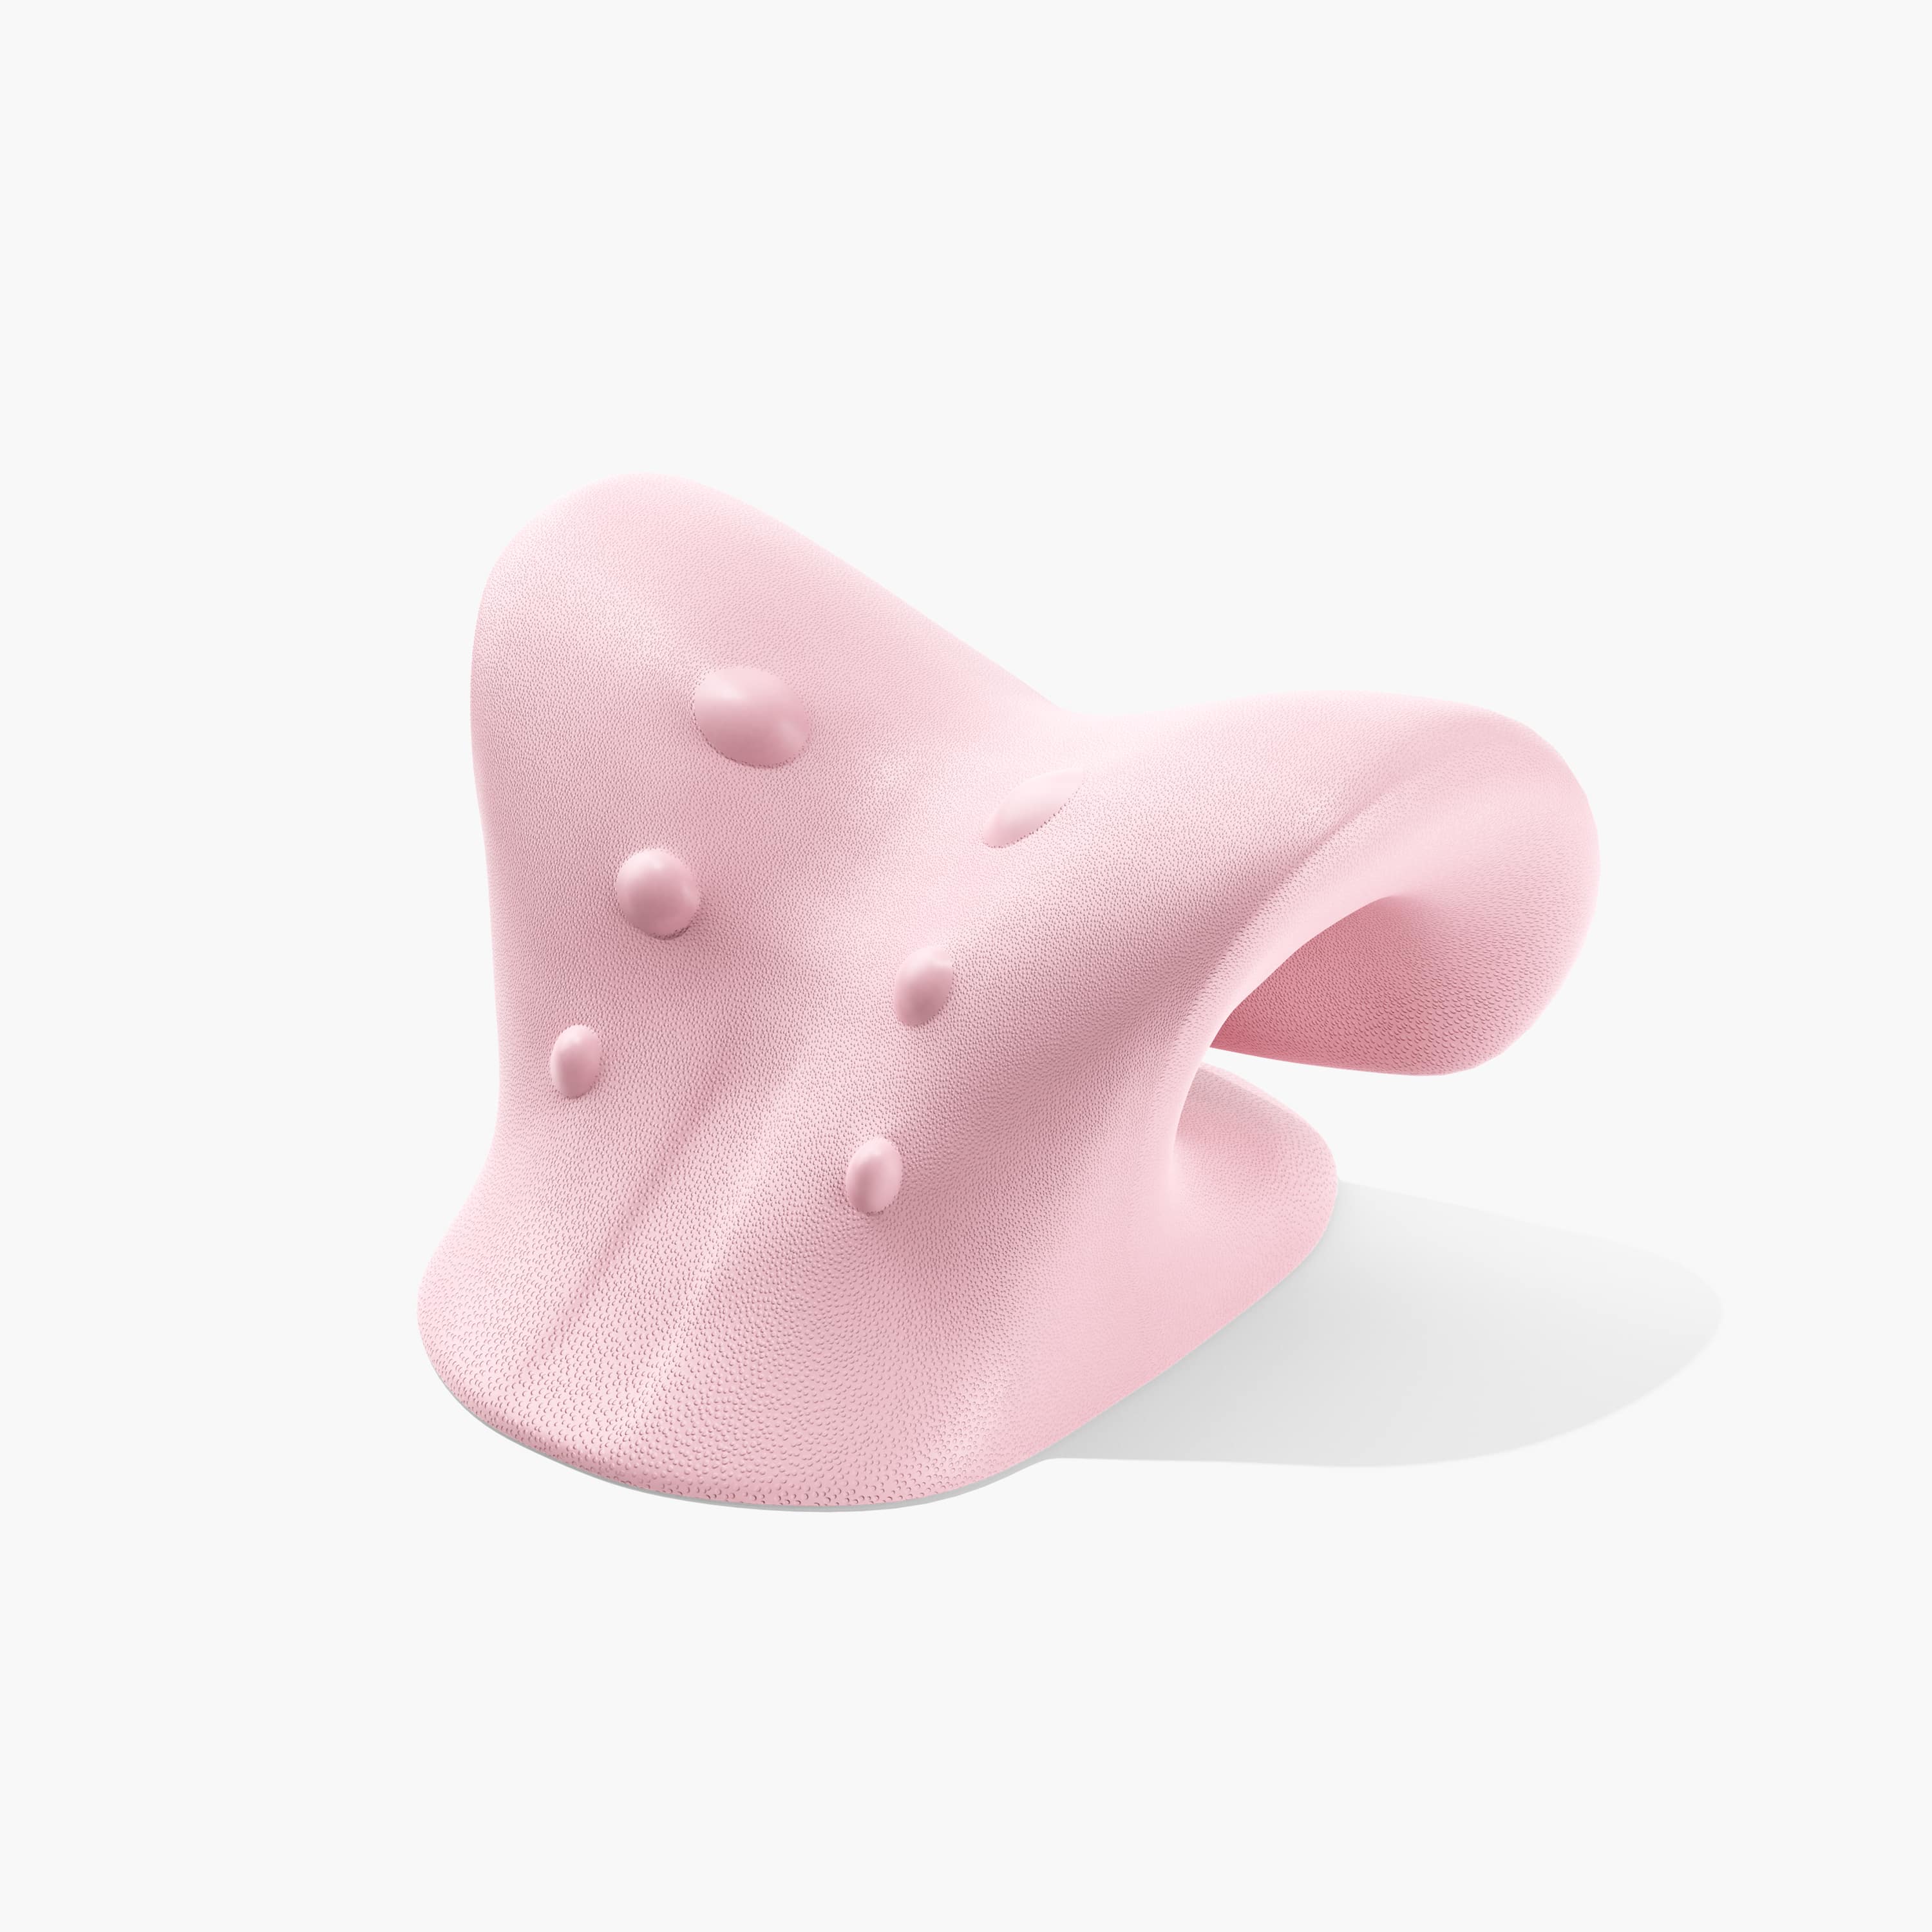 Juno by Nomisk. A pink cervical traction pillow that instantly relieves neck pain. Relieve tension, improve sleep, posture and blood flow by using Juno to stretch out your neck.